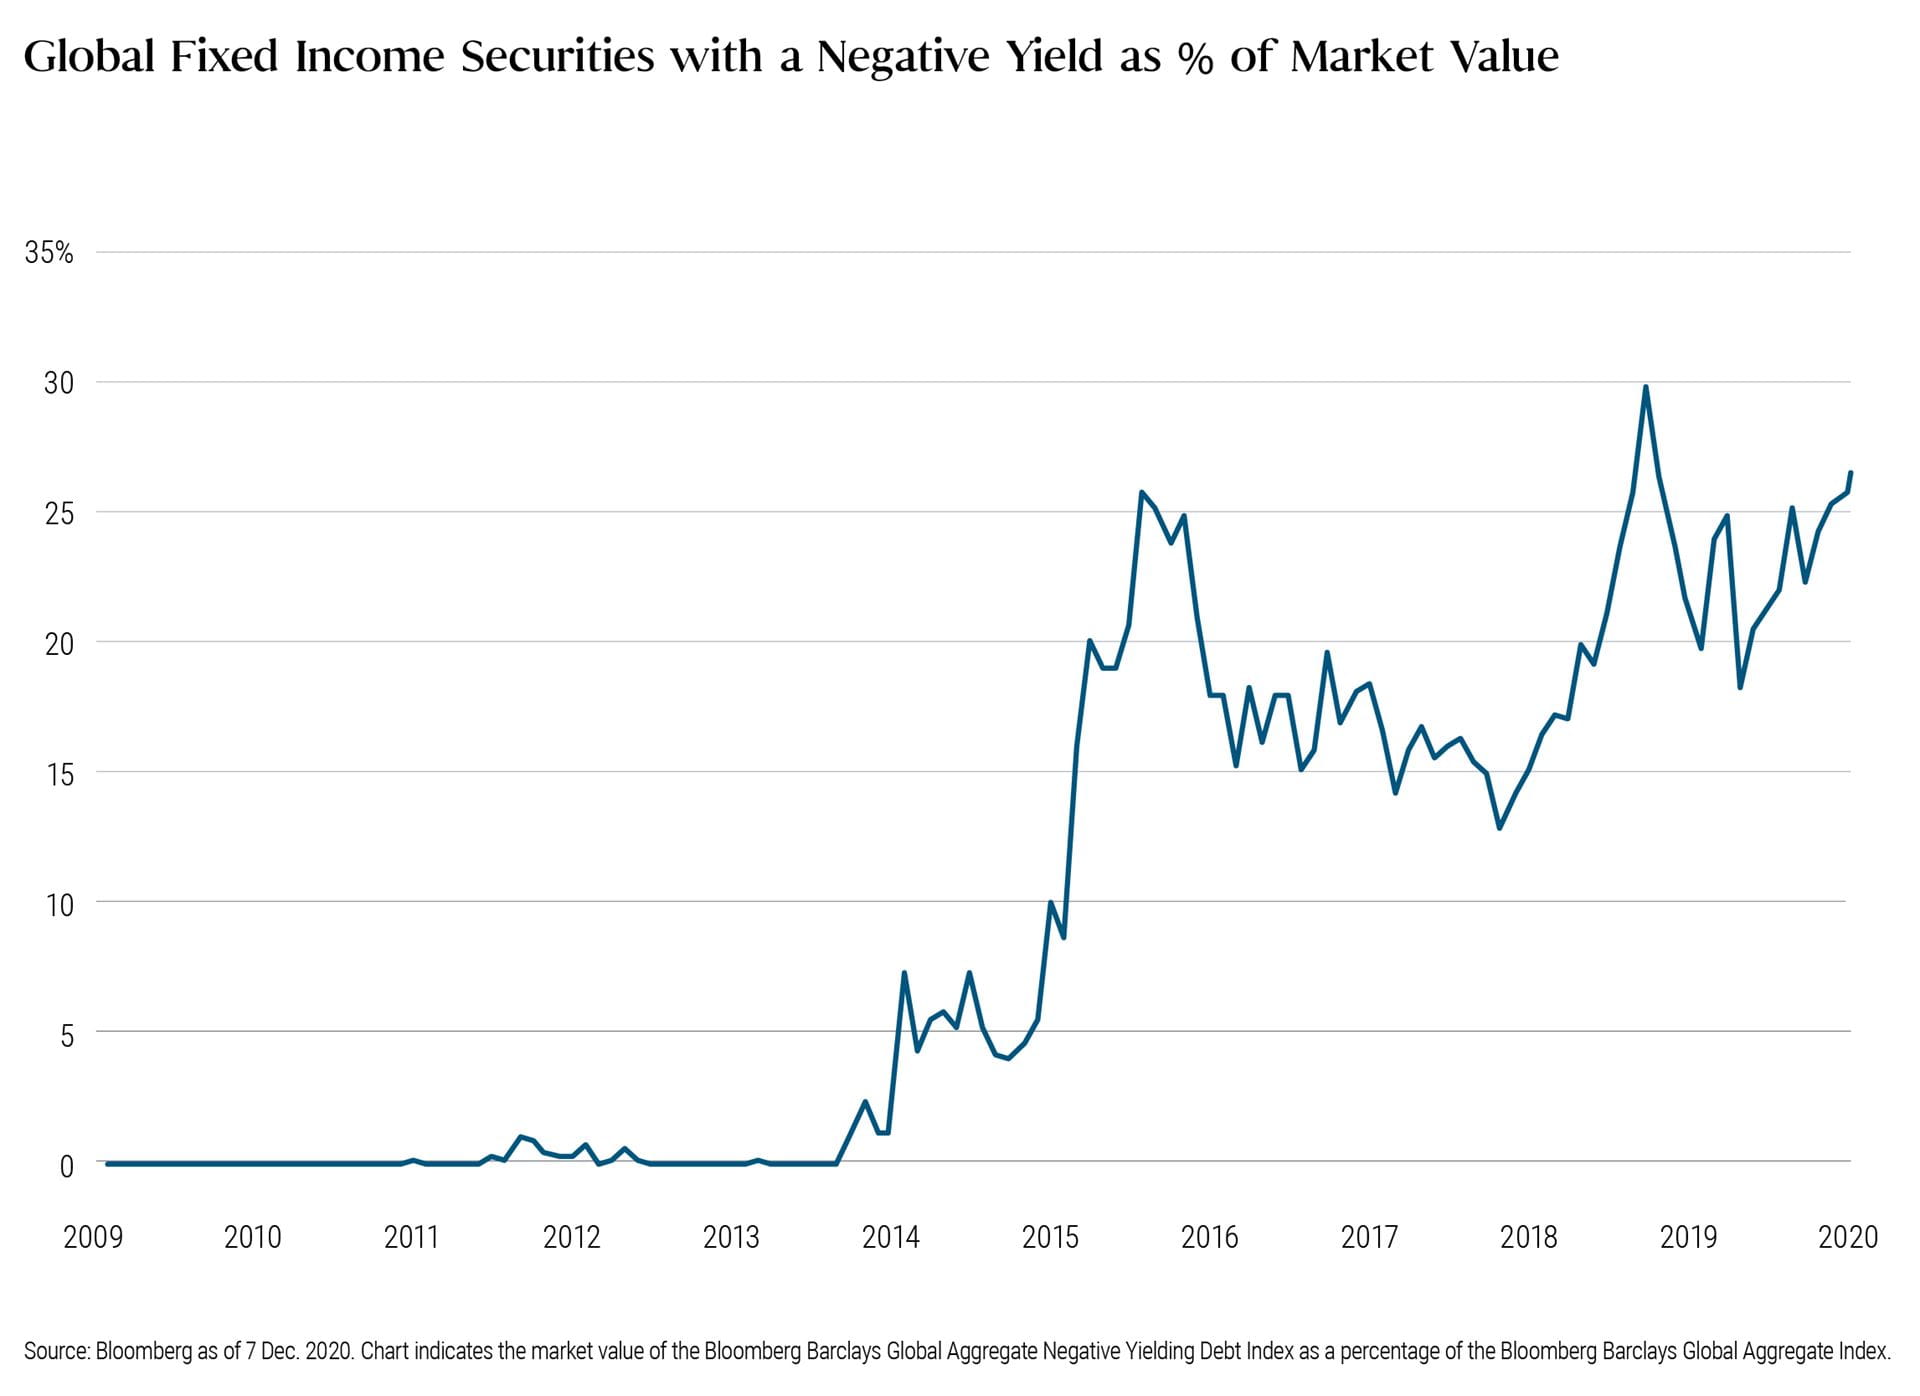 This line chart shows the percentage of securities within the global bond market (by market value and proxied by the Bloomberg Barclays Global Aggregate Index) that offered negative yields over the time frame 2009 to 2020. After hovering at or near zero until 2014, the percentage rose above 25% in 2015, then fell slightly, and then rose again to a peak of 30% in 2018. The percentage remained relatively high at 27% as of December 2020. 